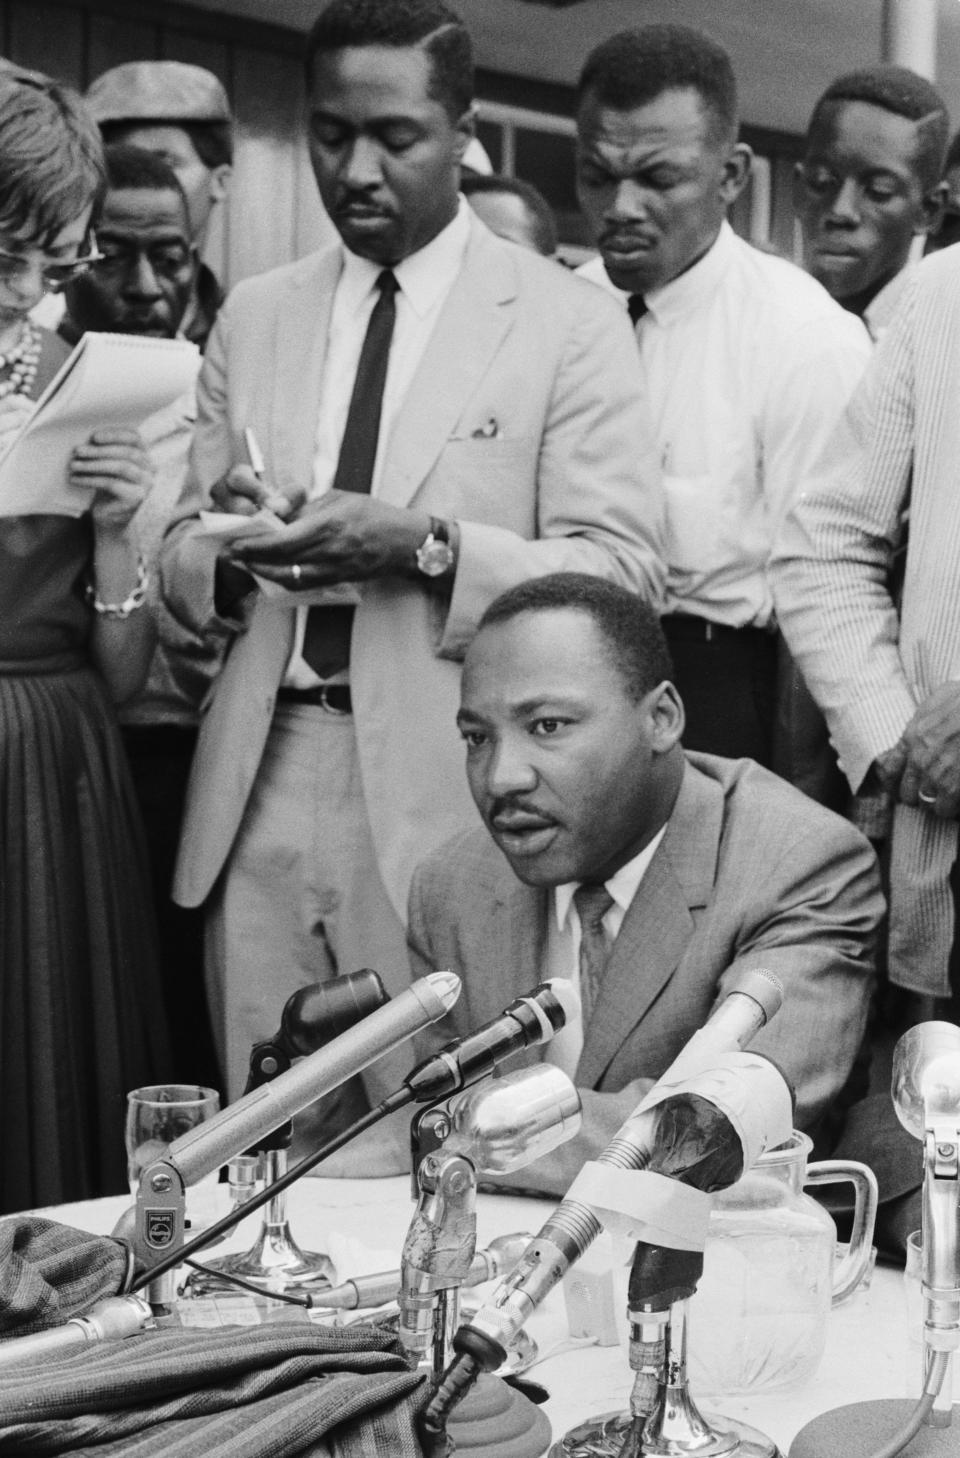 The Rev. Martin Luther King Jr. at a news conference in Birmingham, Ala., in 1963. Taking notes behind him is his speechwriter, Clarence B. Jones.